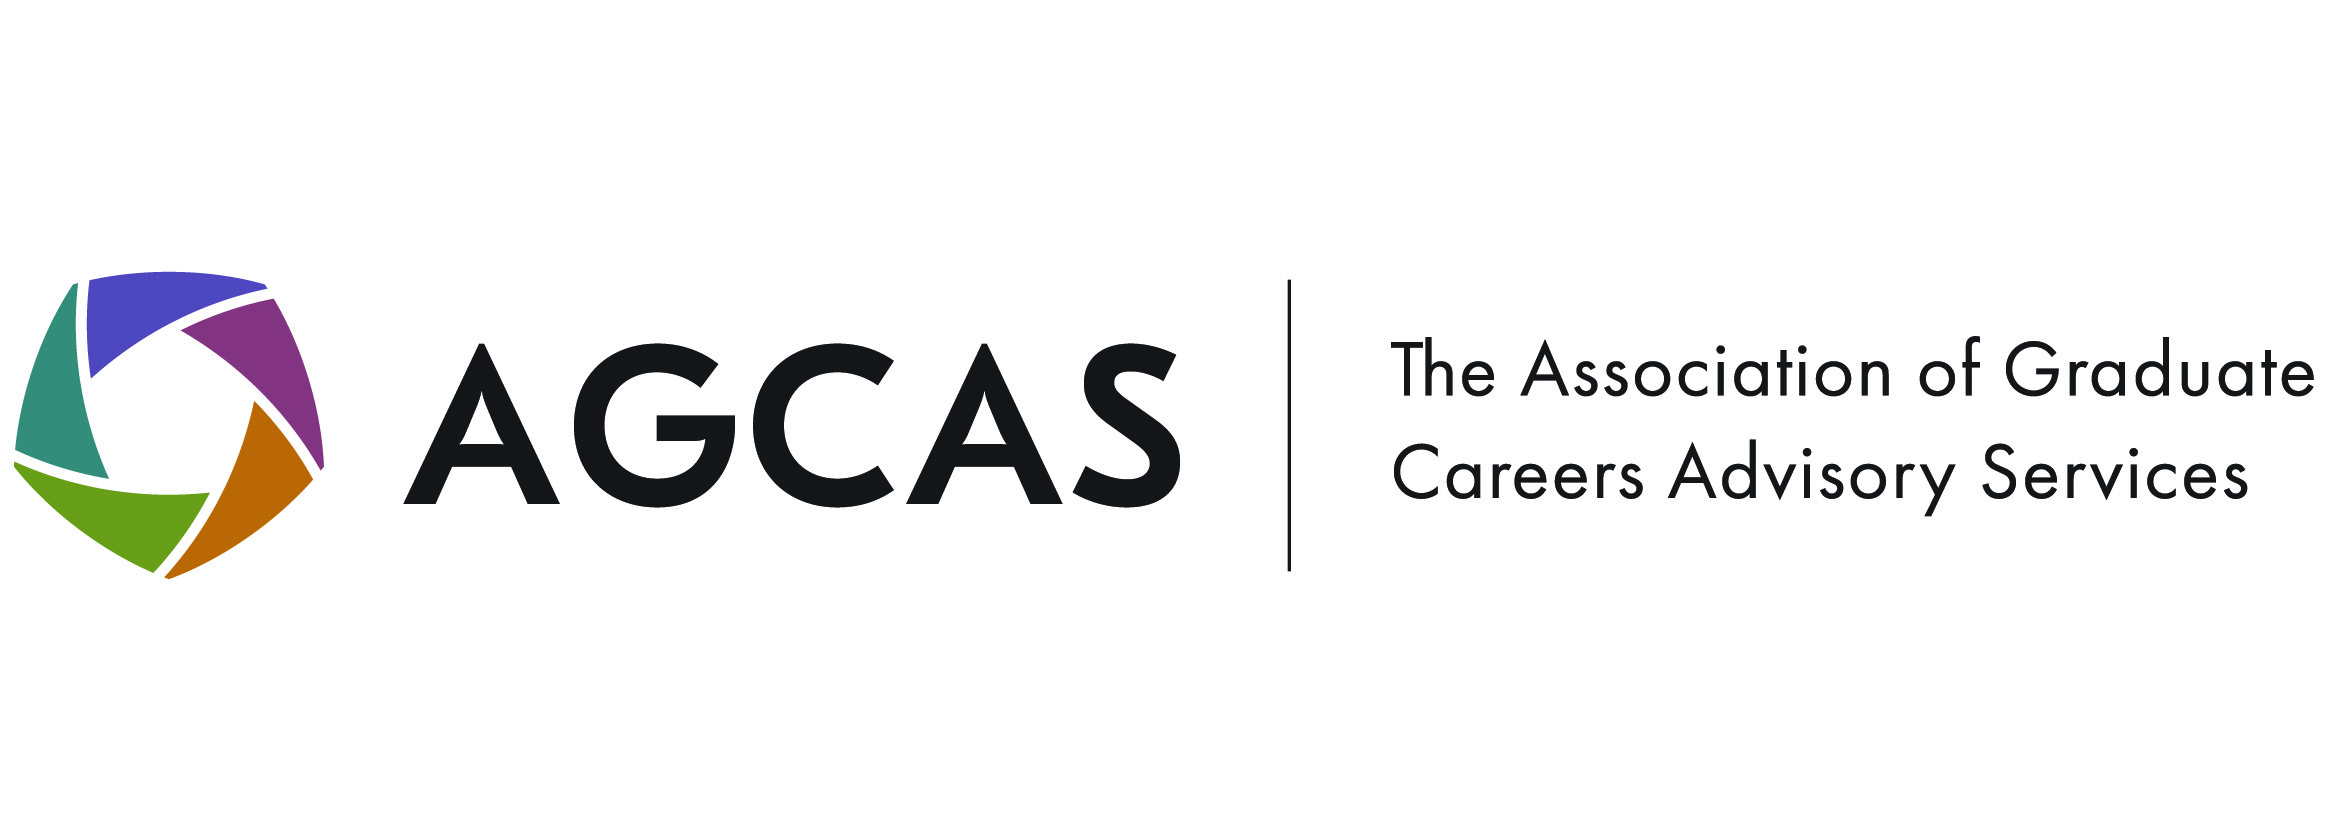 The Association of Graduate Careers Advisory Services